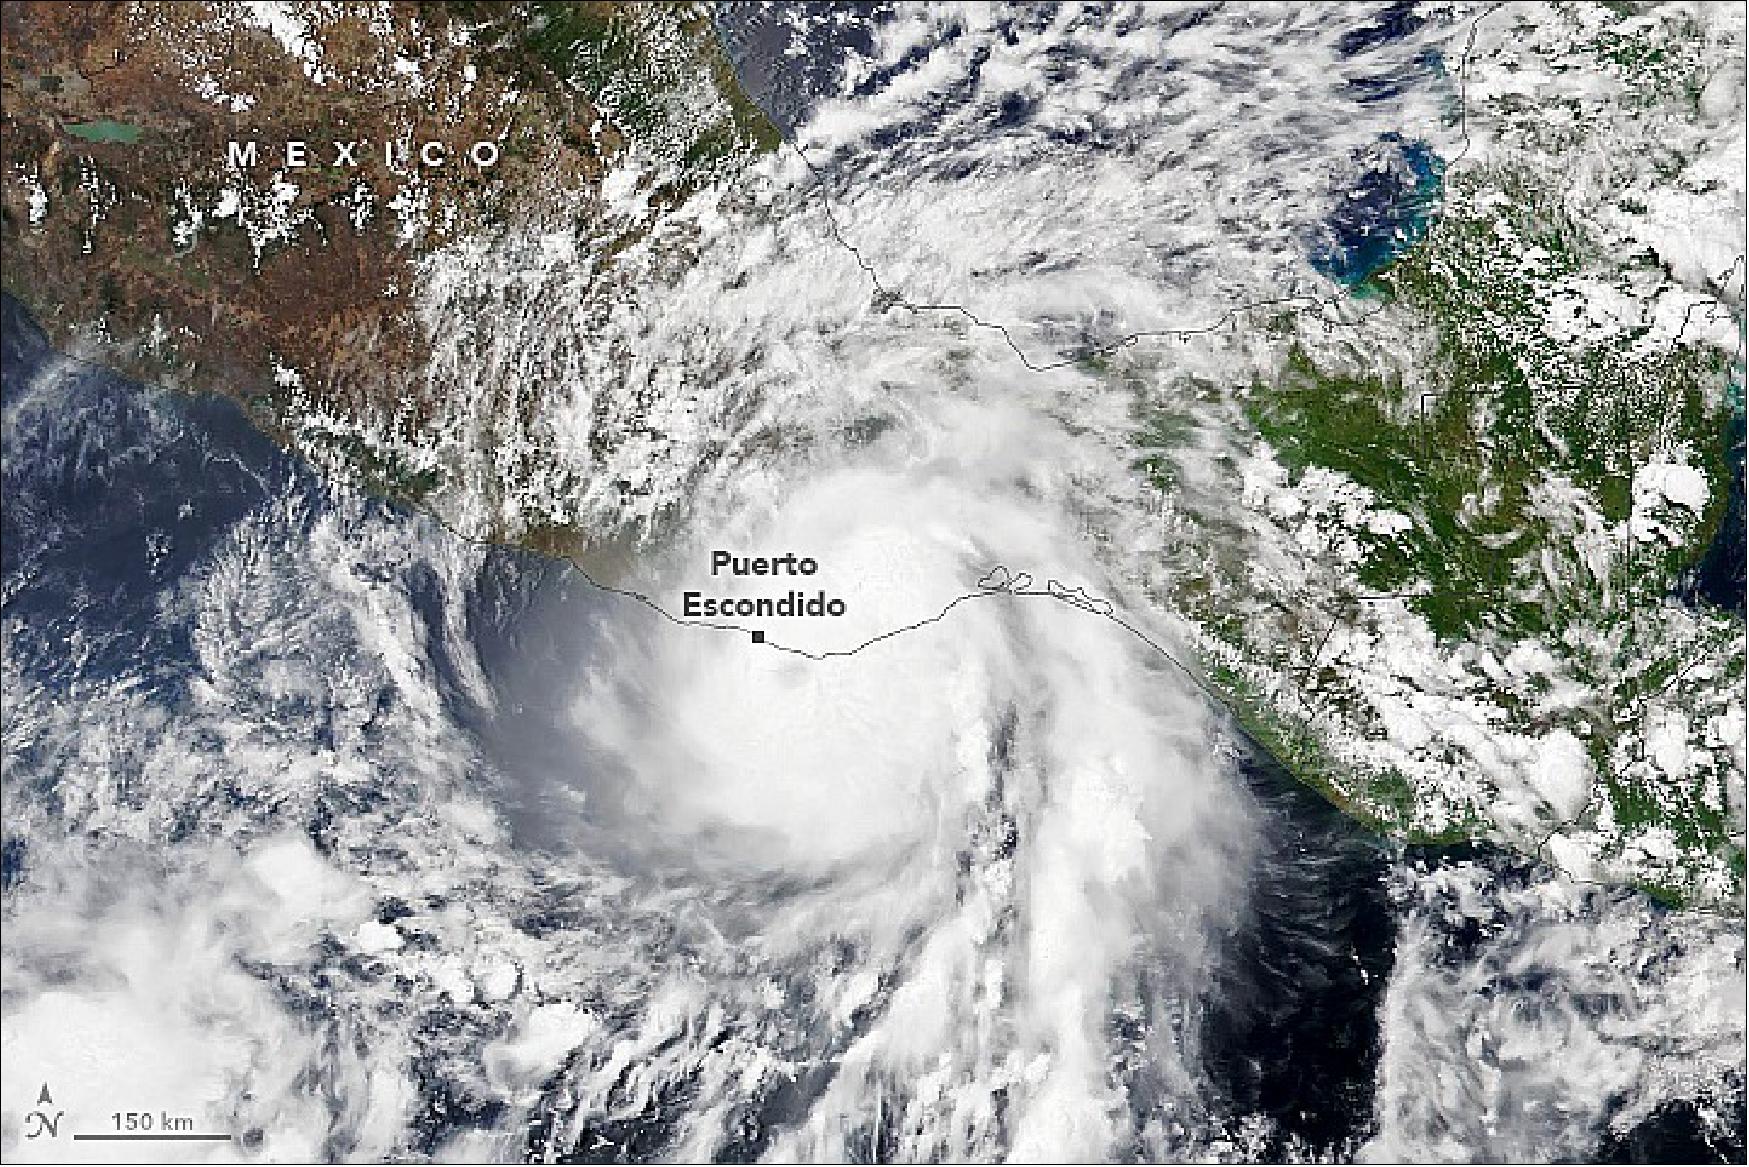 Figure 22: The Visible Infrared Imaging Radiometer Suite (VIIRS) on the NOAA-20 satellite acquired this natural-color image of the storm at 1:35 p.m. local time (19:35 Universal Time) on May 30, 2022, a few hours before the storm made landfall. Agatha brought intense downpours and howling winds to several tourist beaches and fishing towns in an otherwise sparsely populated region before weakening rapidly as it moved northward over the mountainous terrain of southern Mexico (image credit: NASA Earth Observatory image by Lauren Dauphin, using VIIRS data from NASA EOSDIS LANCE, GIBS/Worldview, and the Joint Polar Satellite System (JPSS). Caption by Adam Voiland)